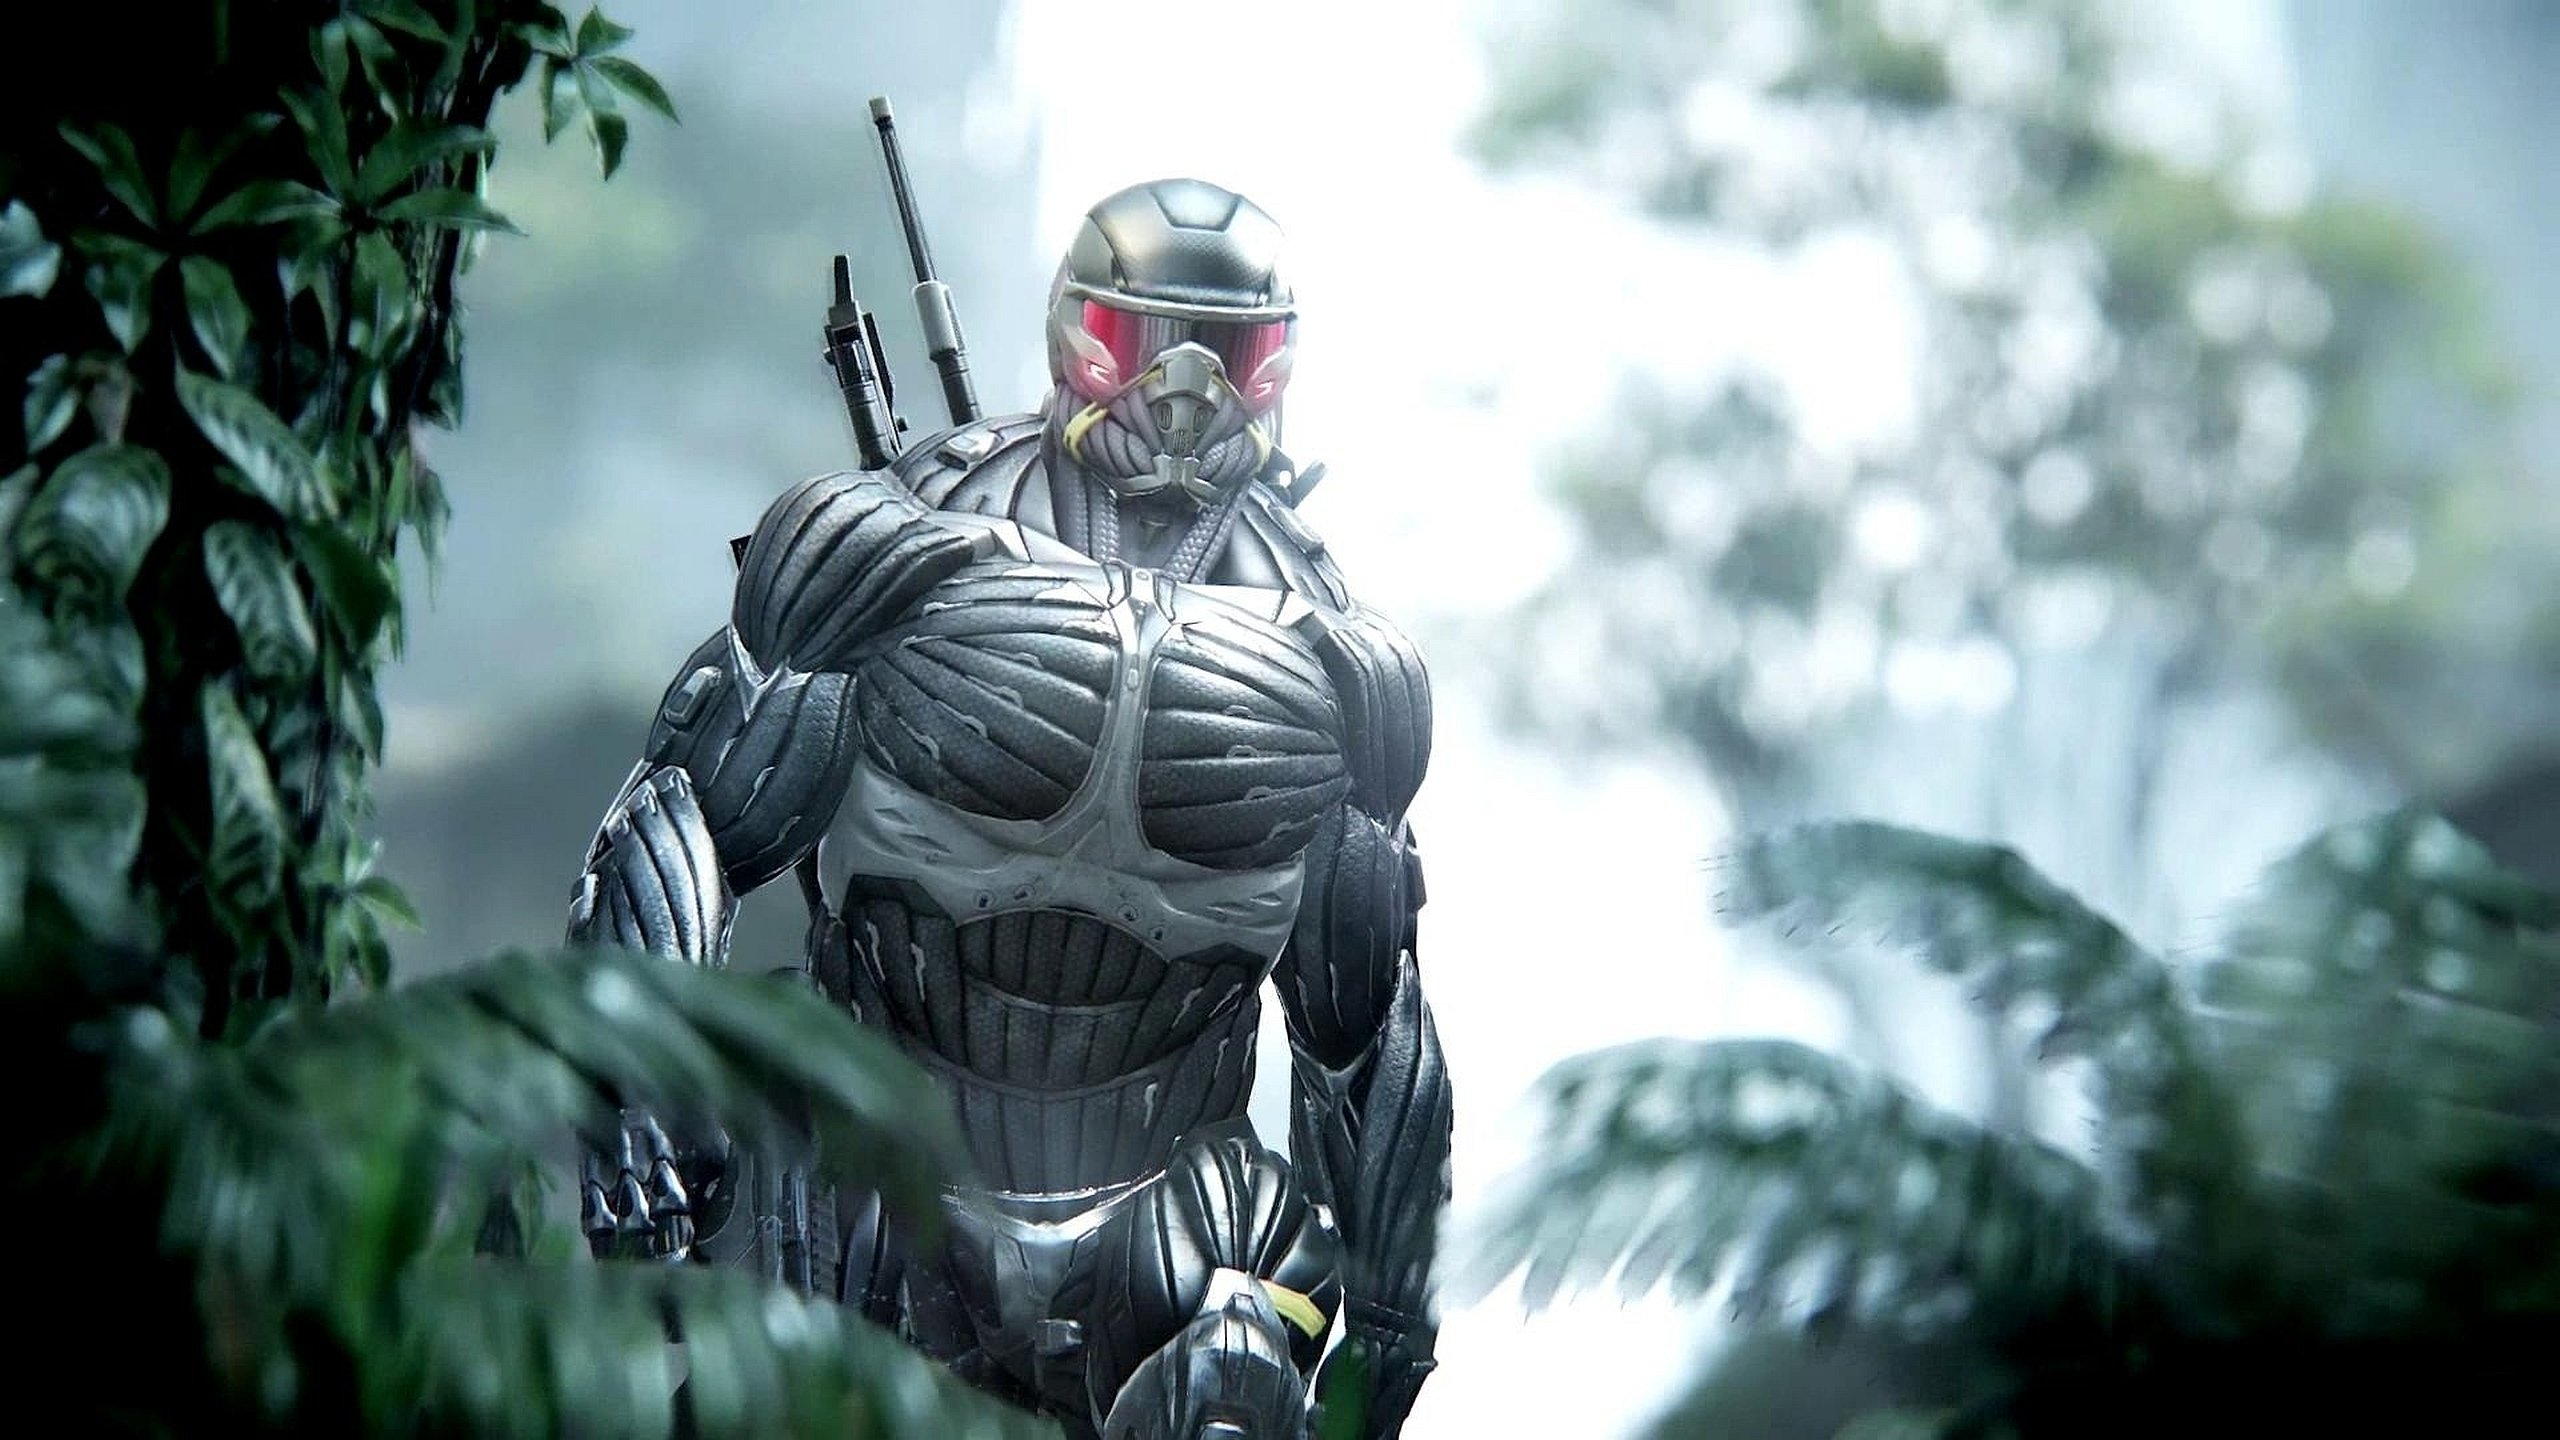 crysis, Sci fi, Fps, Shooter, Action, Fighing, Futuristic, Warrior, Military Wallpaper